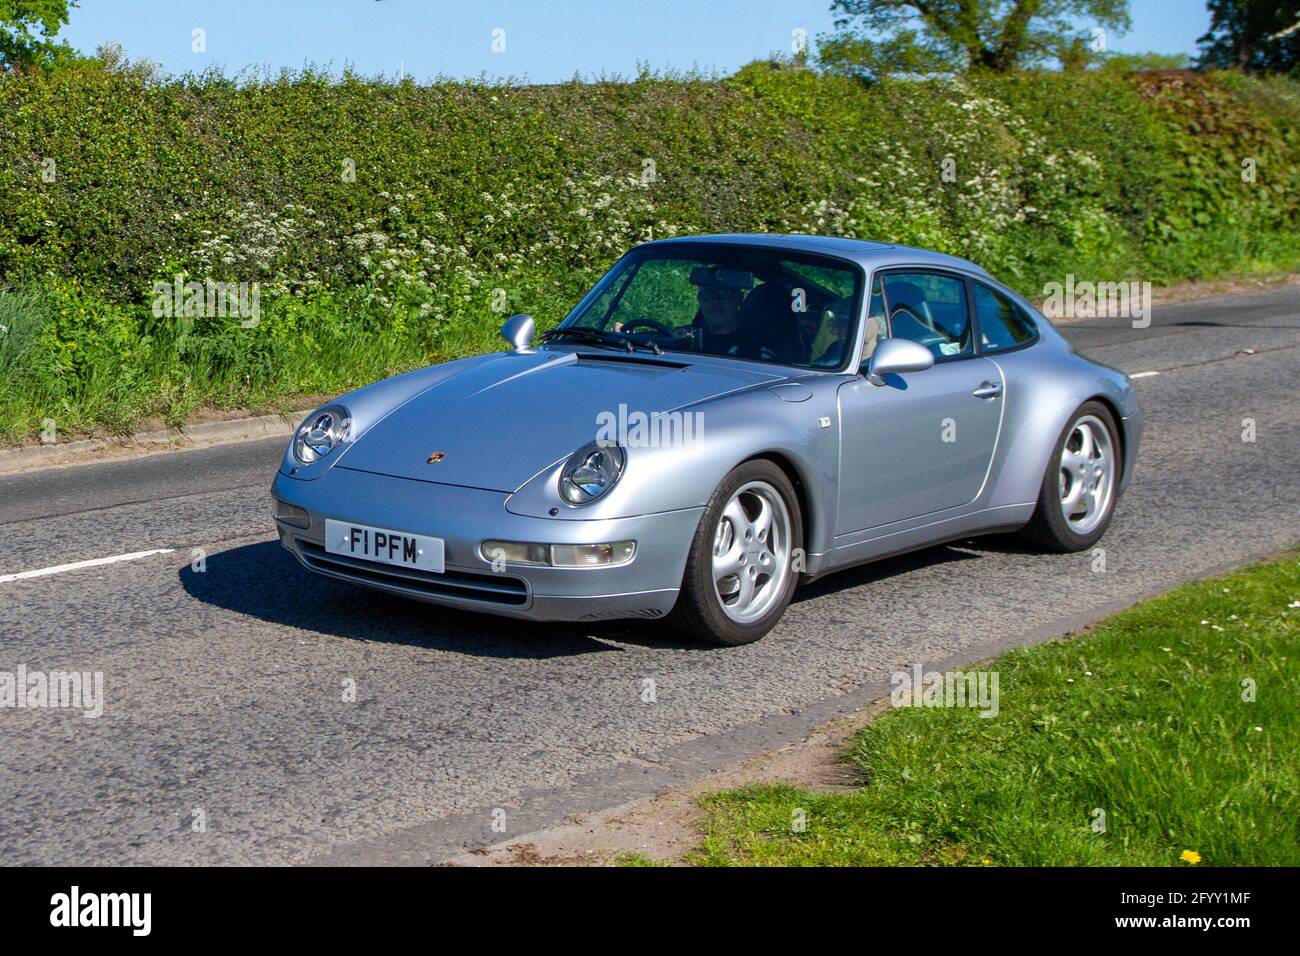 1996 90s silver Porsche 911 Carrera 4 two-door 2+2 high performance  rear-engined sports car ; Vehicular traffic, moving vehicles, cars, vehicle  driving en-route to Capesthorne Hall classic May car show, Cheshire, UK